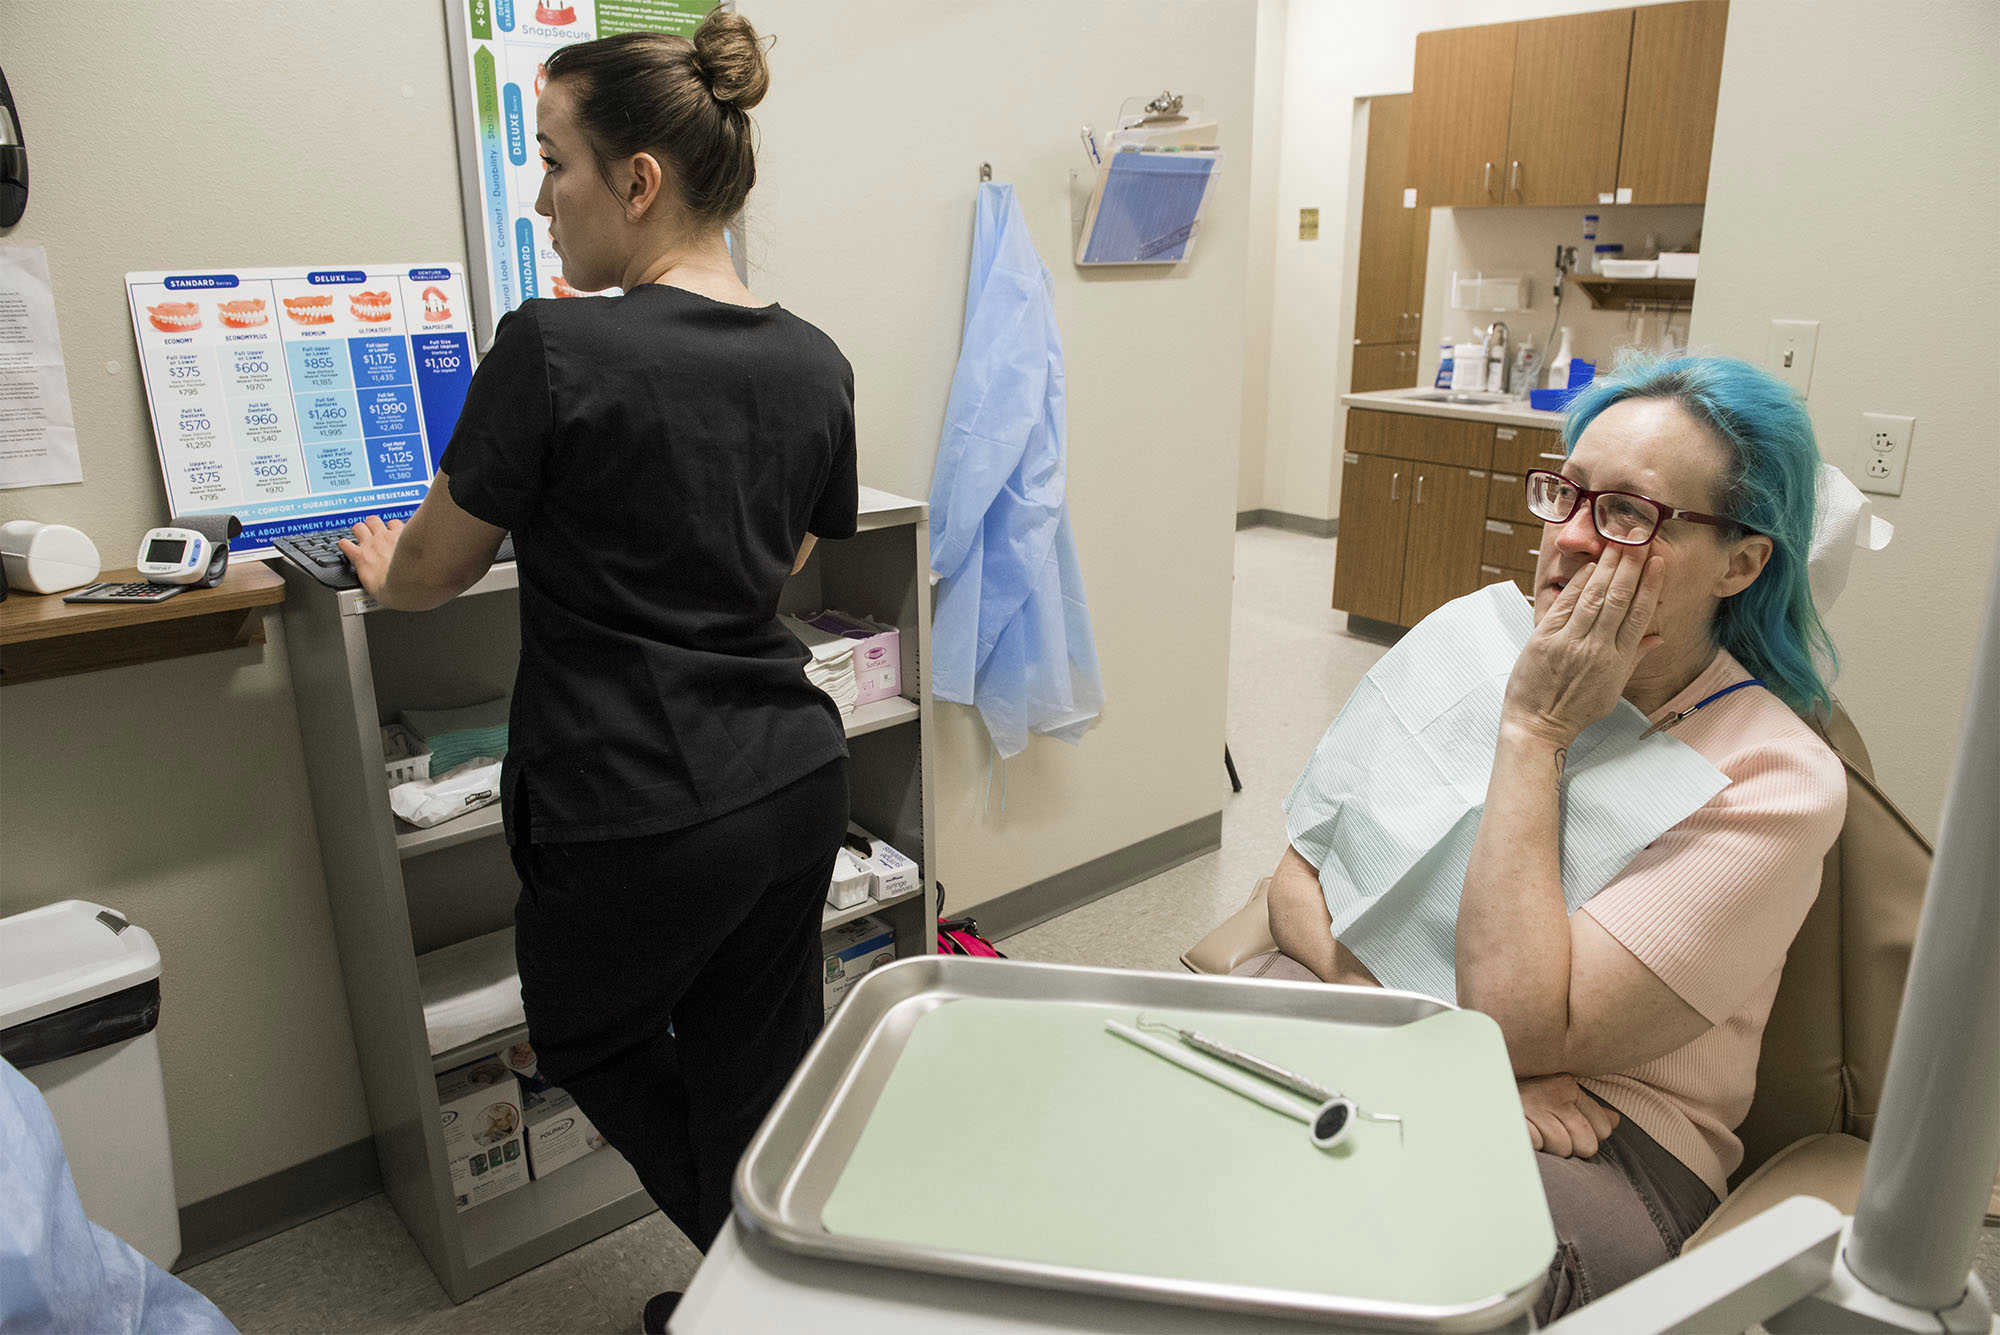  Dental Assistant Sam Mattix, left, shows Eyssen the results of her dental exam which Eyssen said confirmed the damage to her teeth is as bad as she thought, and prohibitively expensive to fix. 